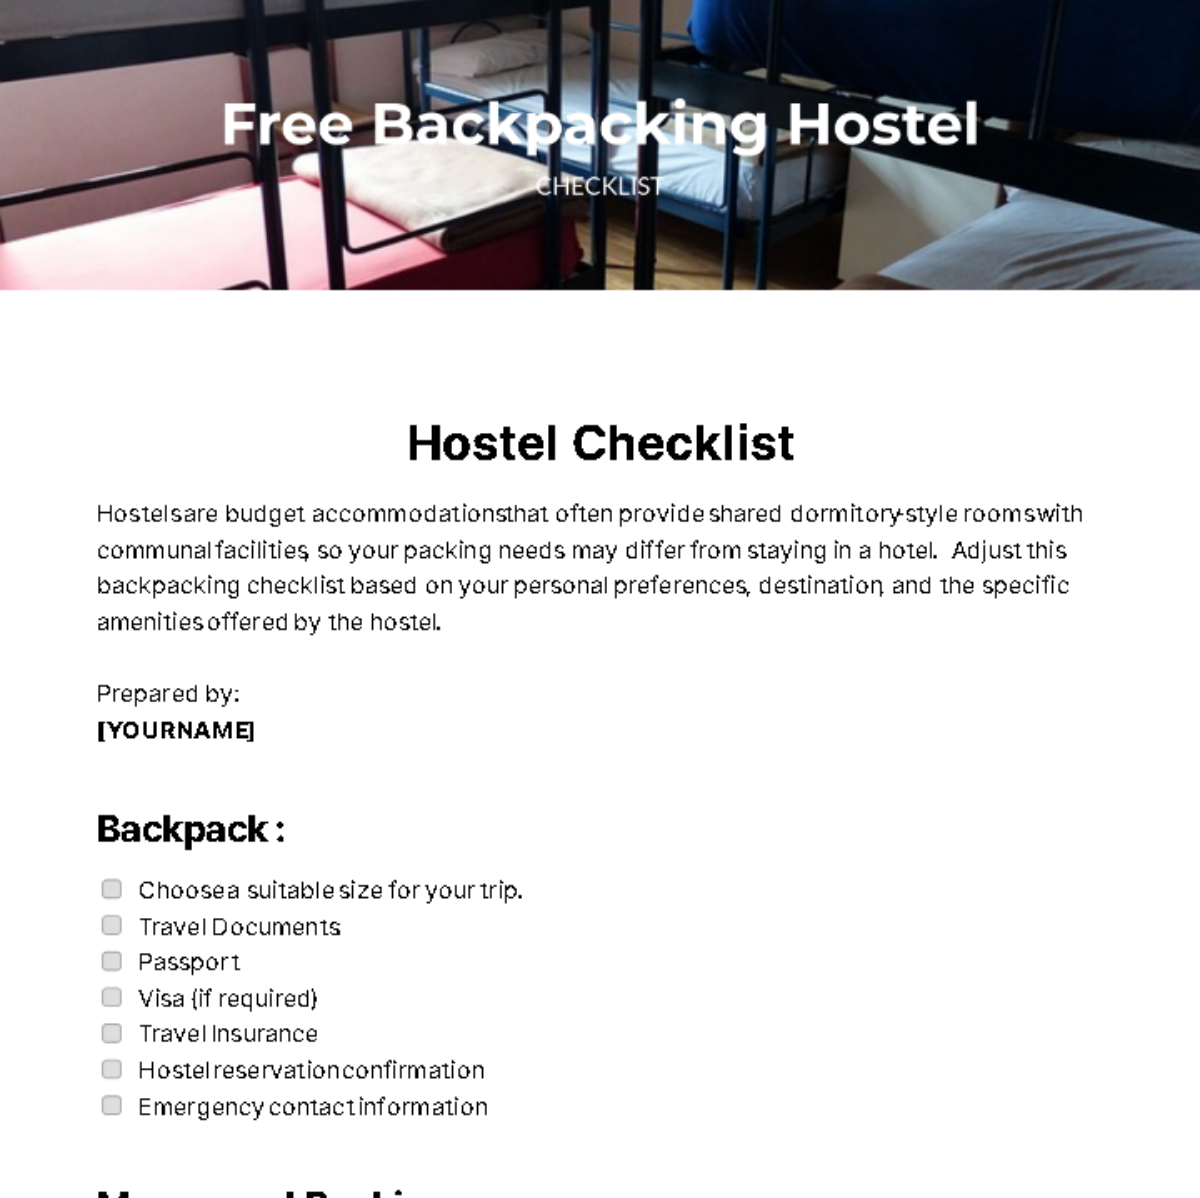 Free Backpacking Hostel Checklist Template